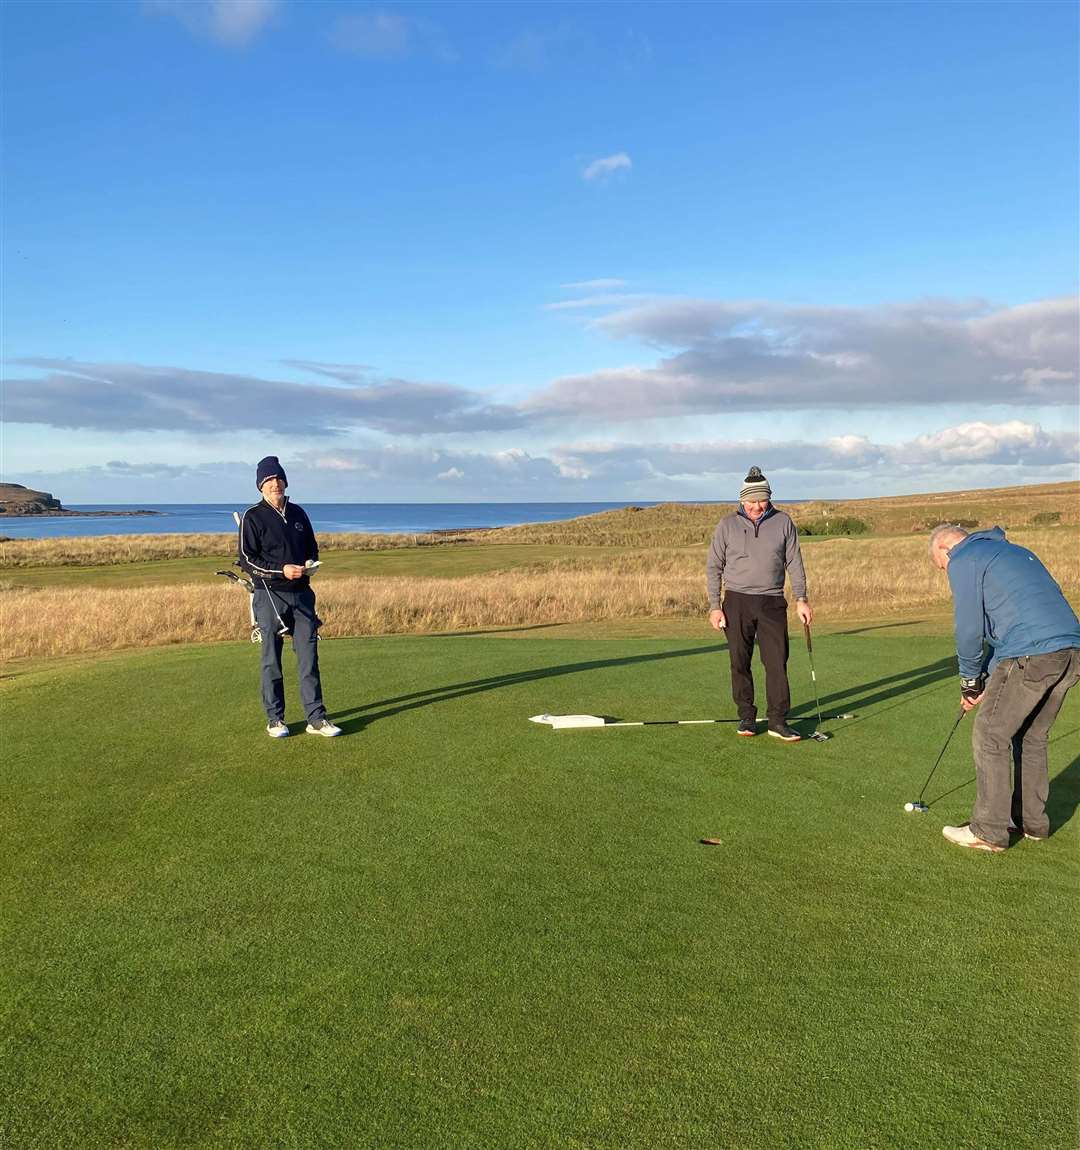 Bruce Mackay, winner of the latest round of Reay Golf Club's Winter League Stableford, putting on the eighth green.